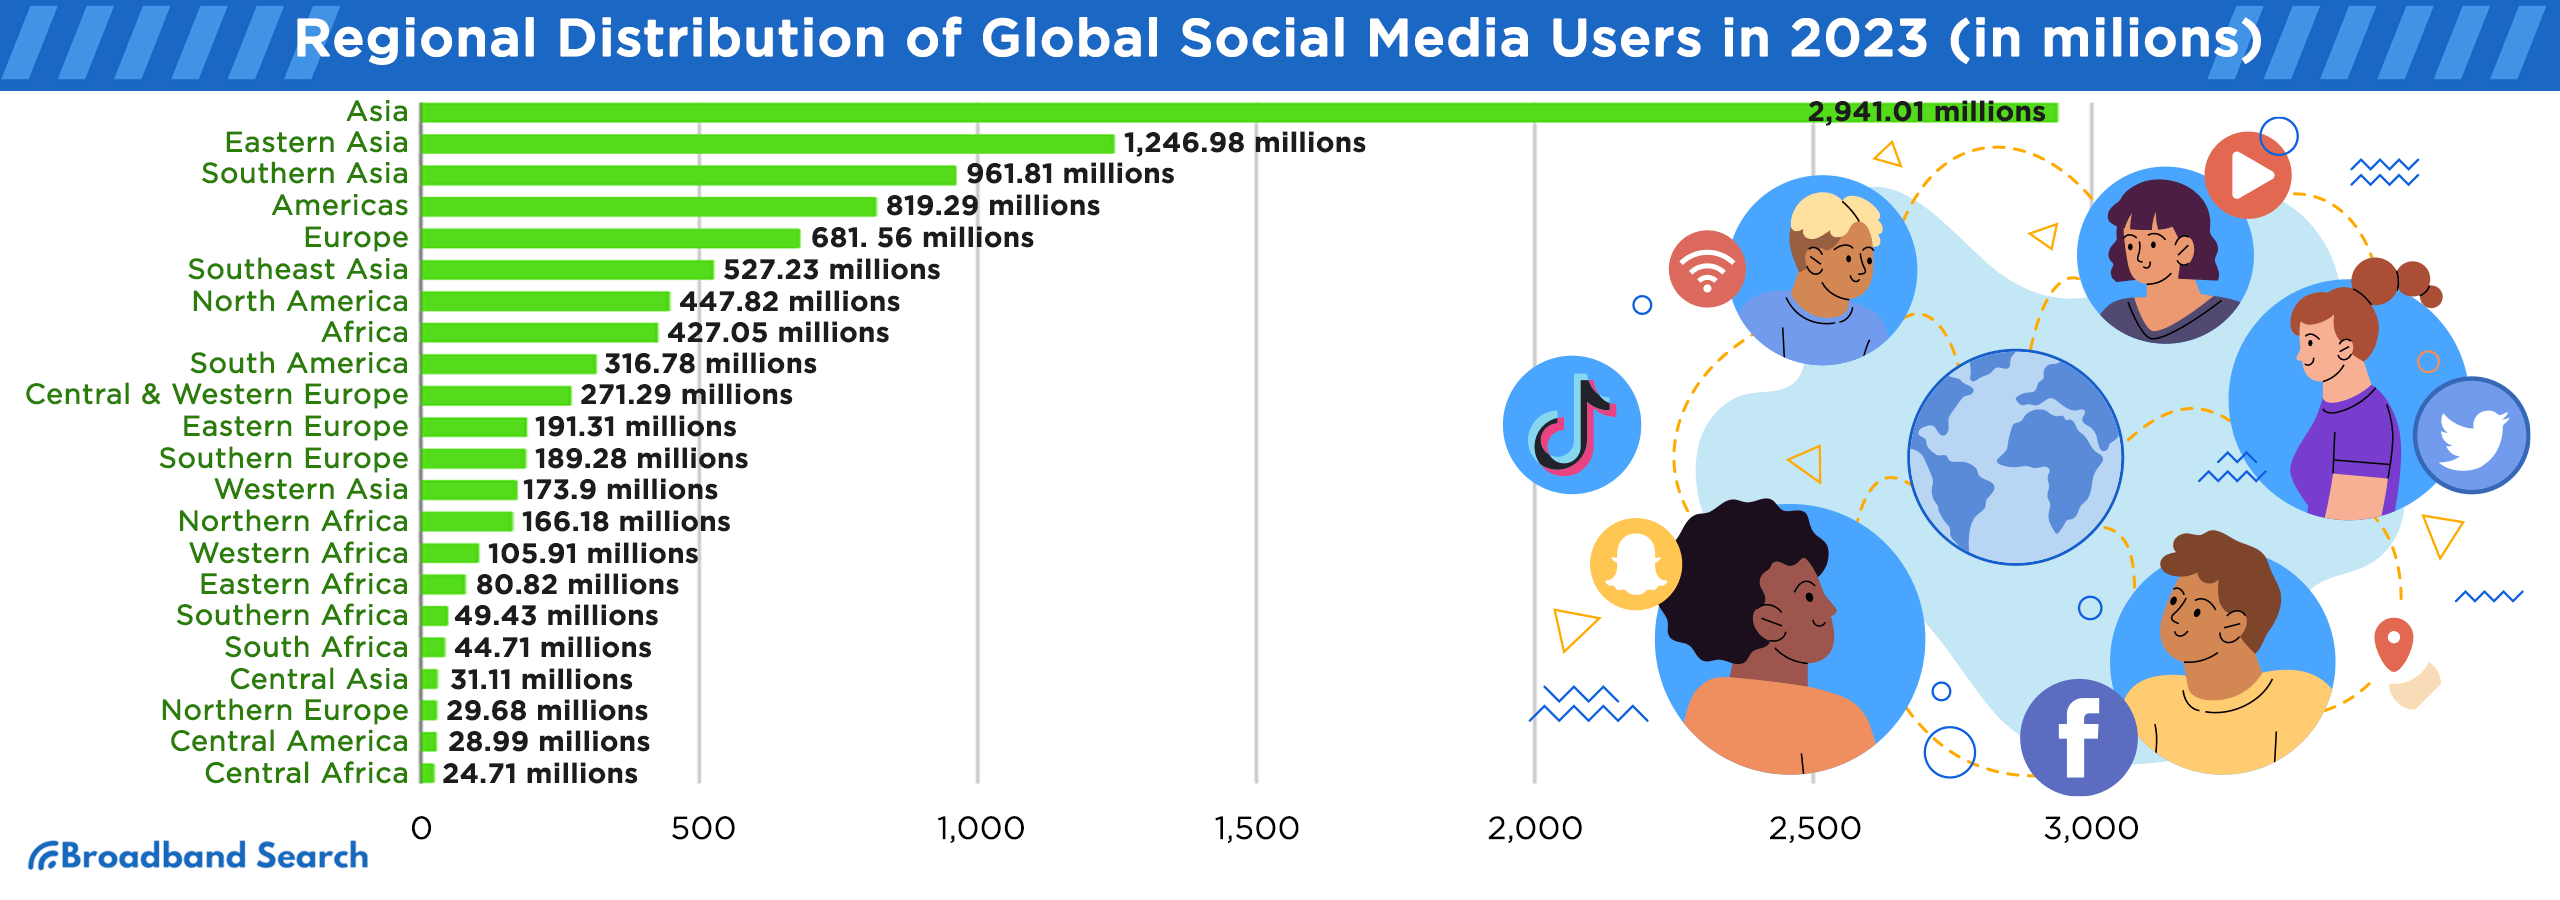 Regional Distribution of global social media users in 2023 where data is presented in millions